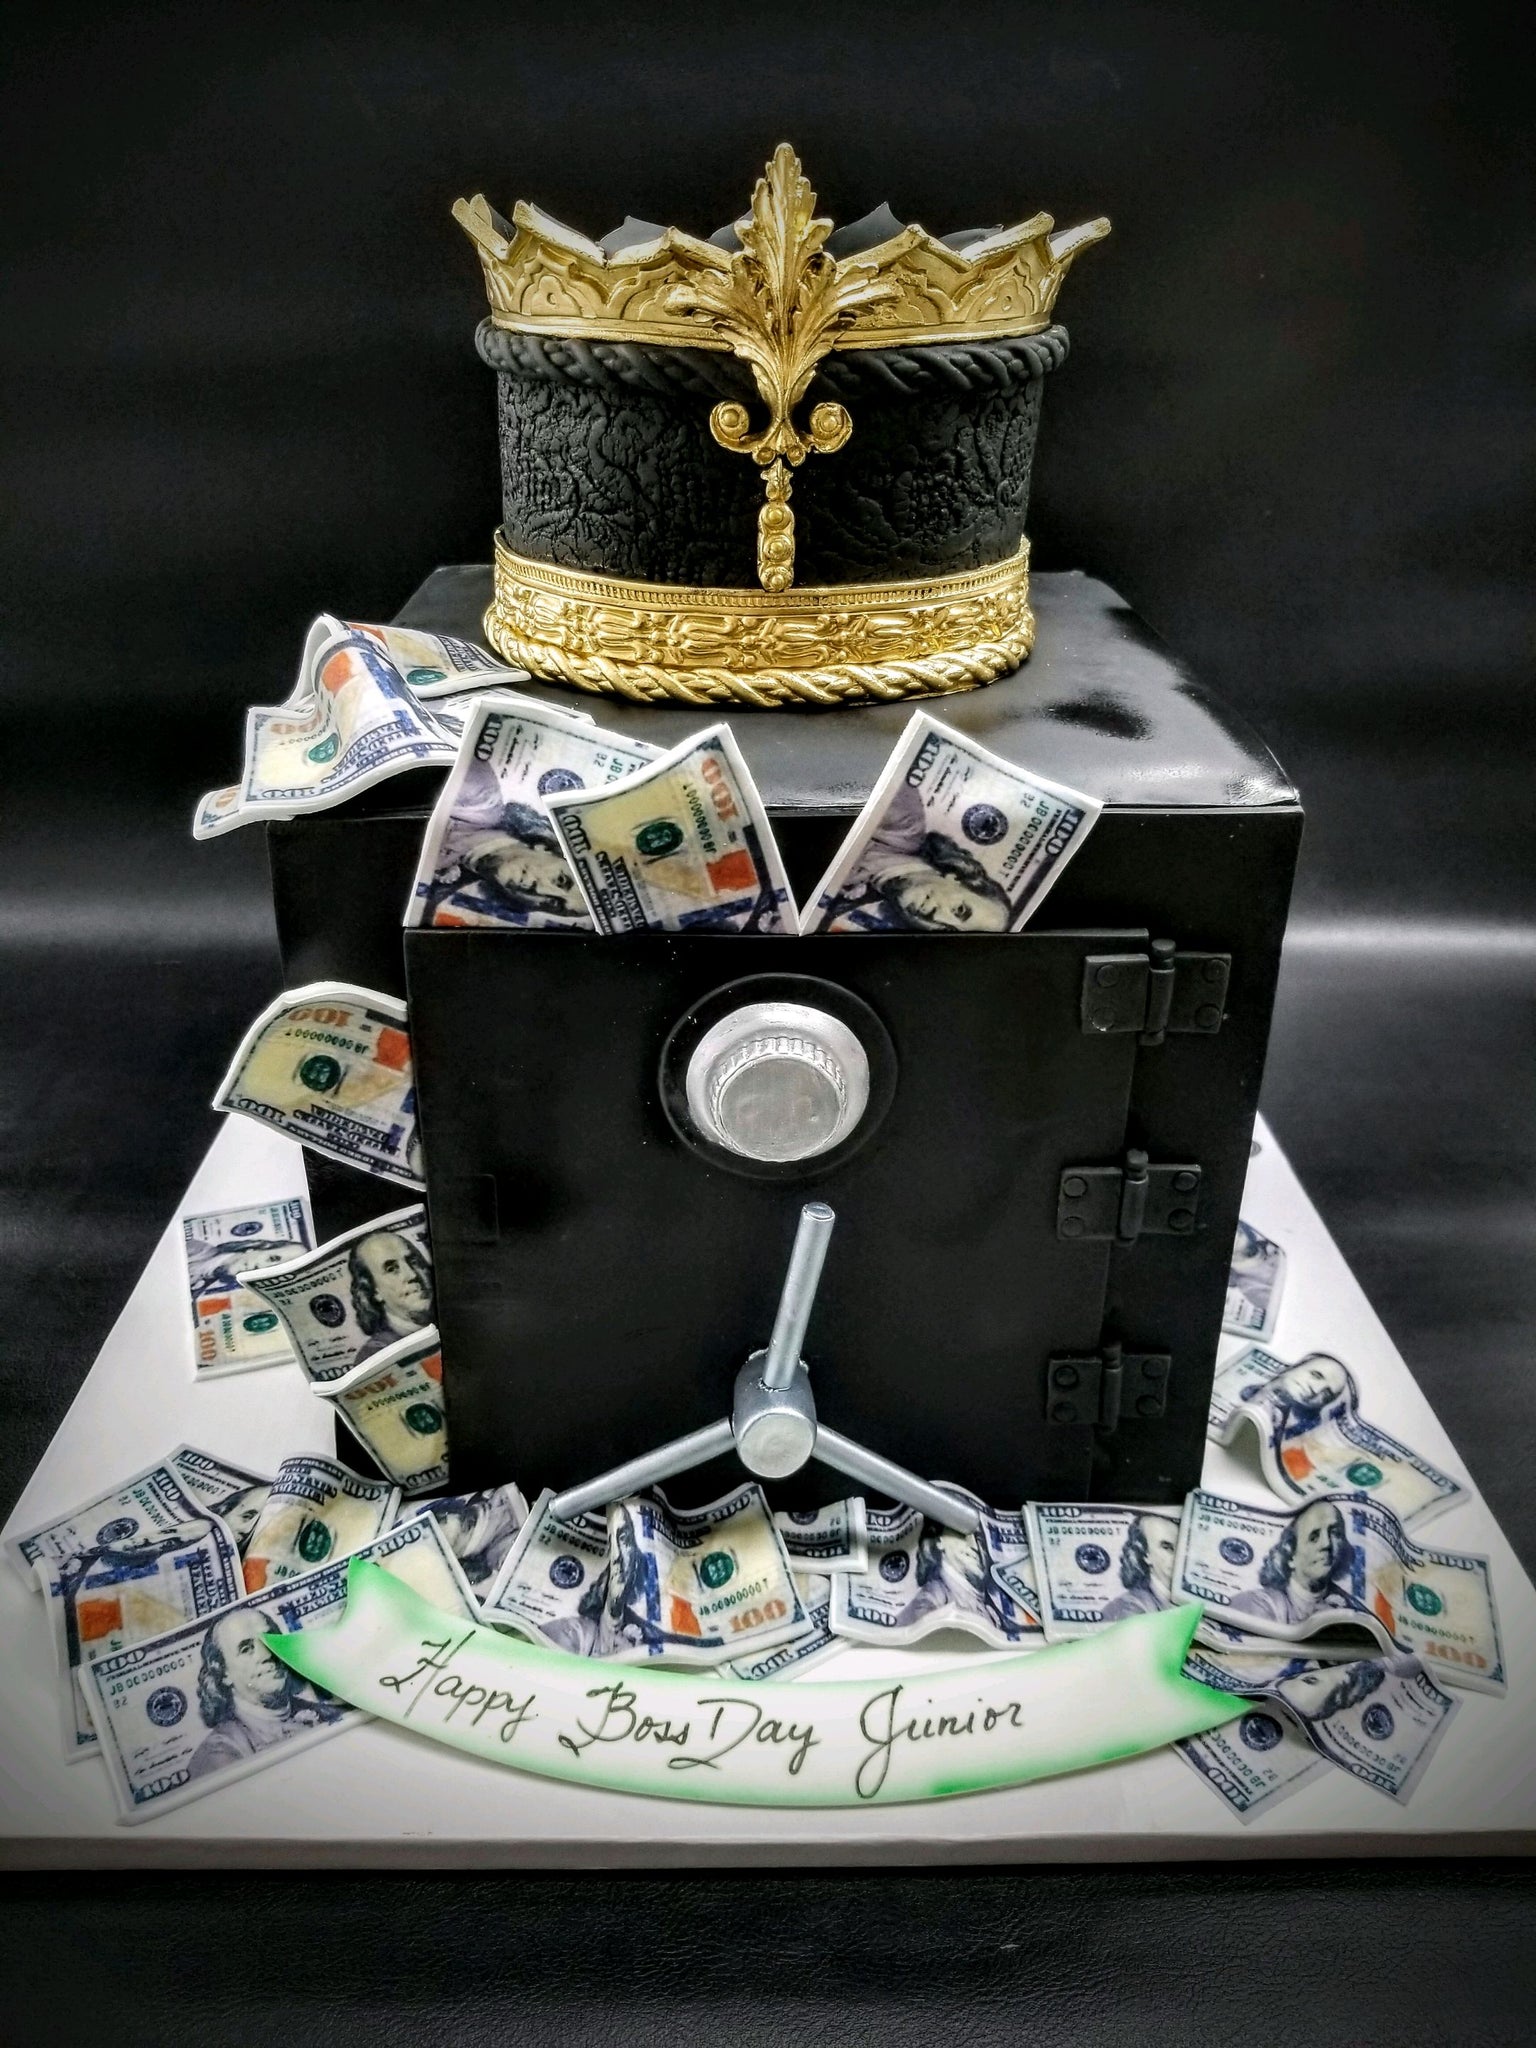 Premium Photo | Cake decorated with berries and edible money